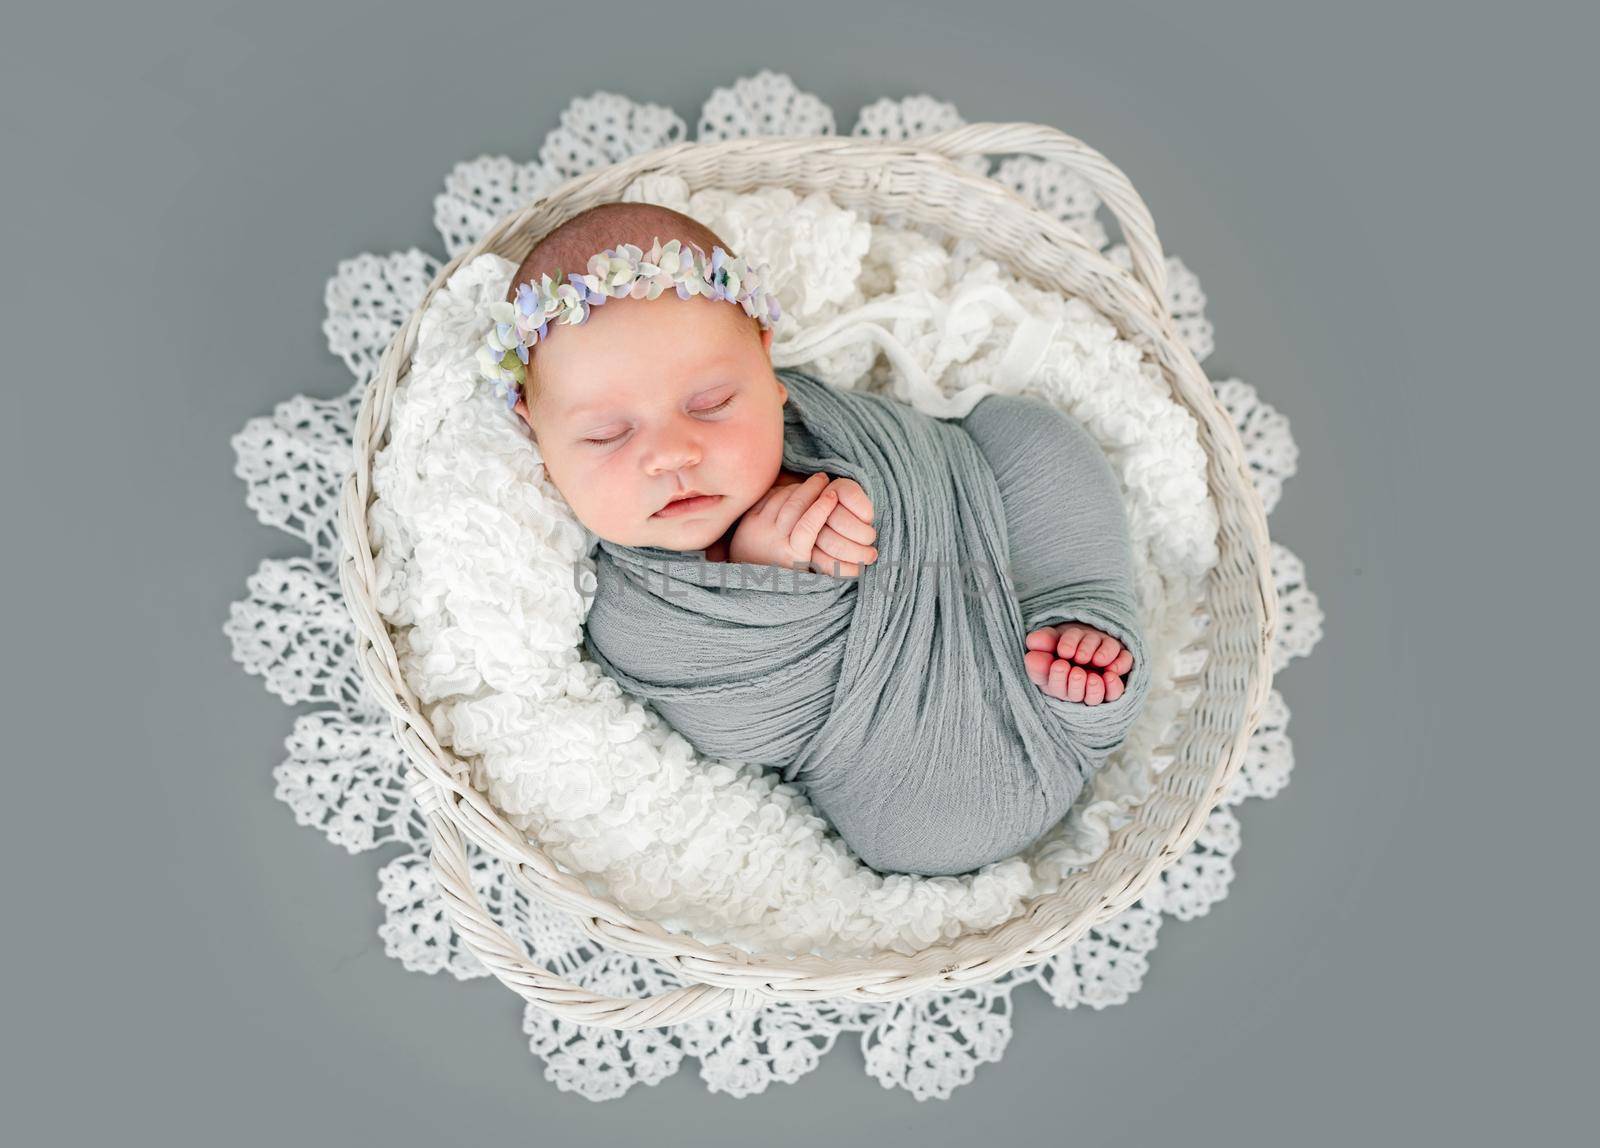 Adorable newborn baby girl wearing wreath lying on her back in basket and sleeping. Sweet swaddled in fabric infant child napping during studio photoshoot with decoration